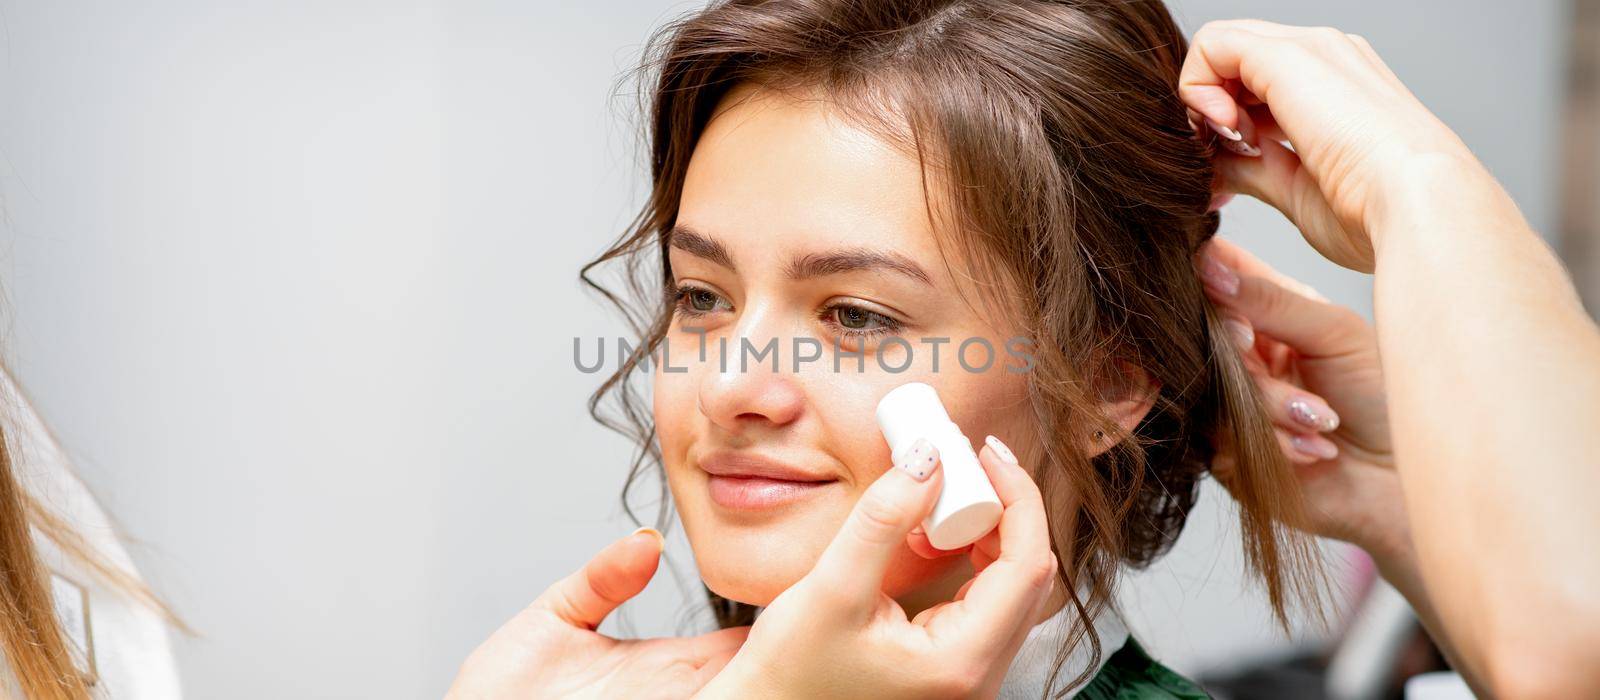 Makeup artist applying cream blush foundation tube on the cheek of the young caucasian woman in a beauty salon